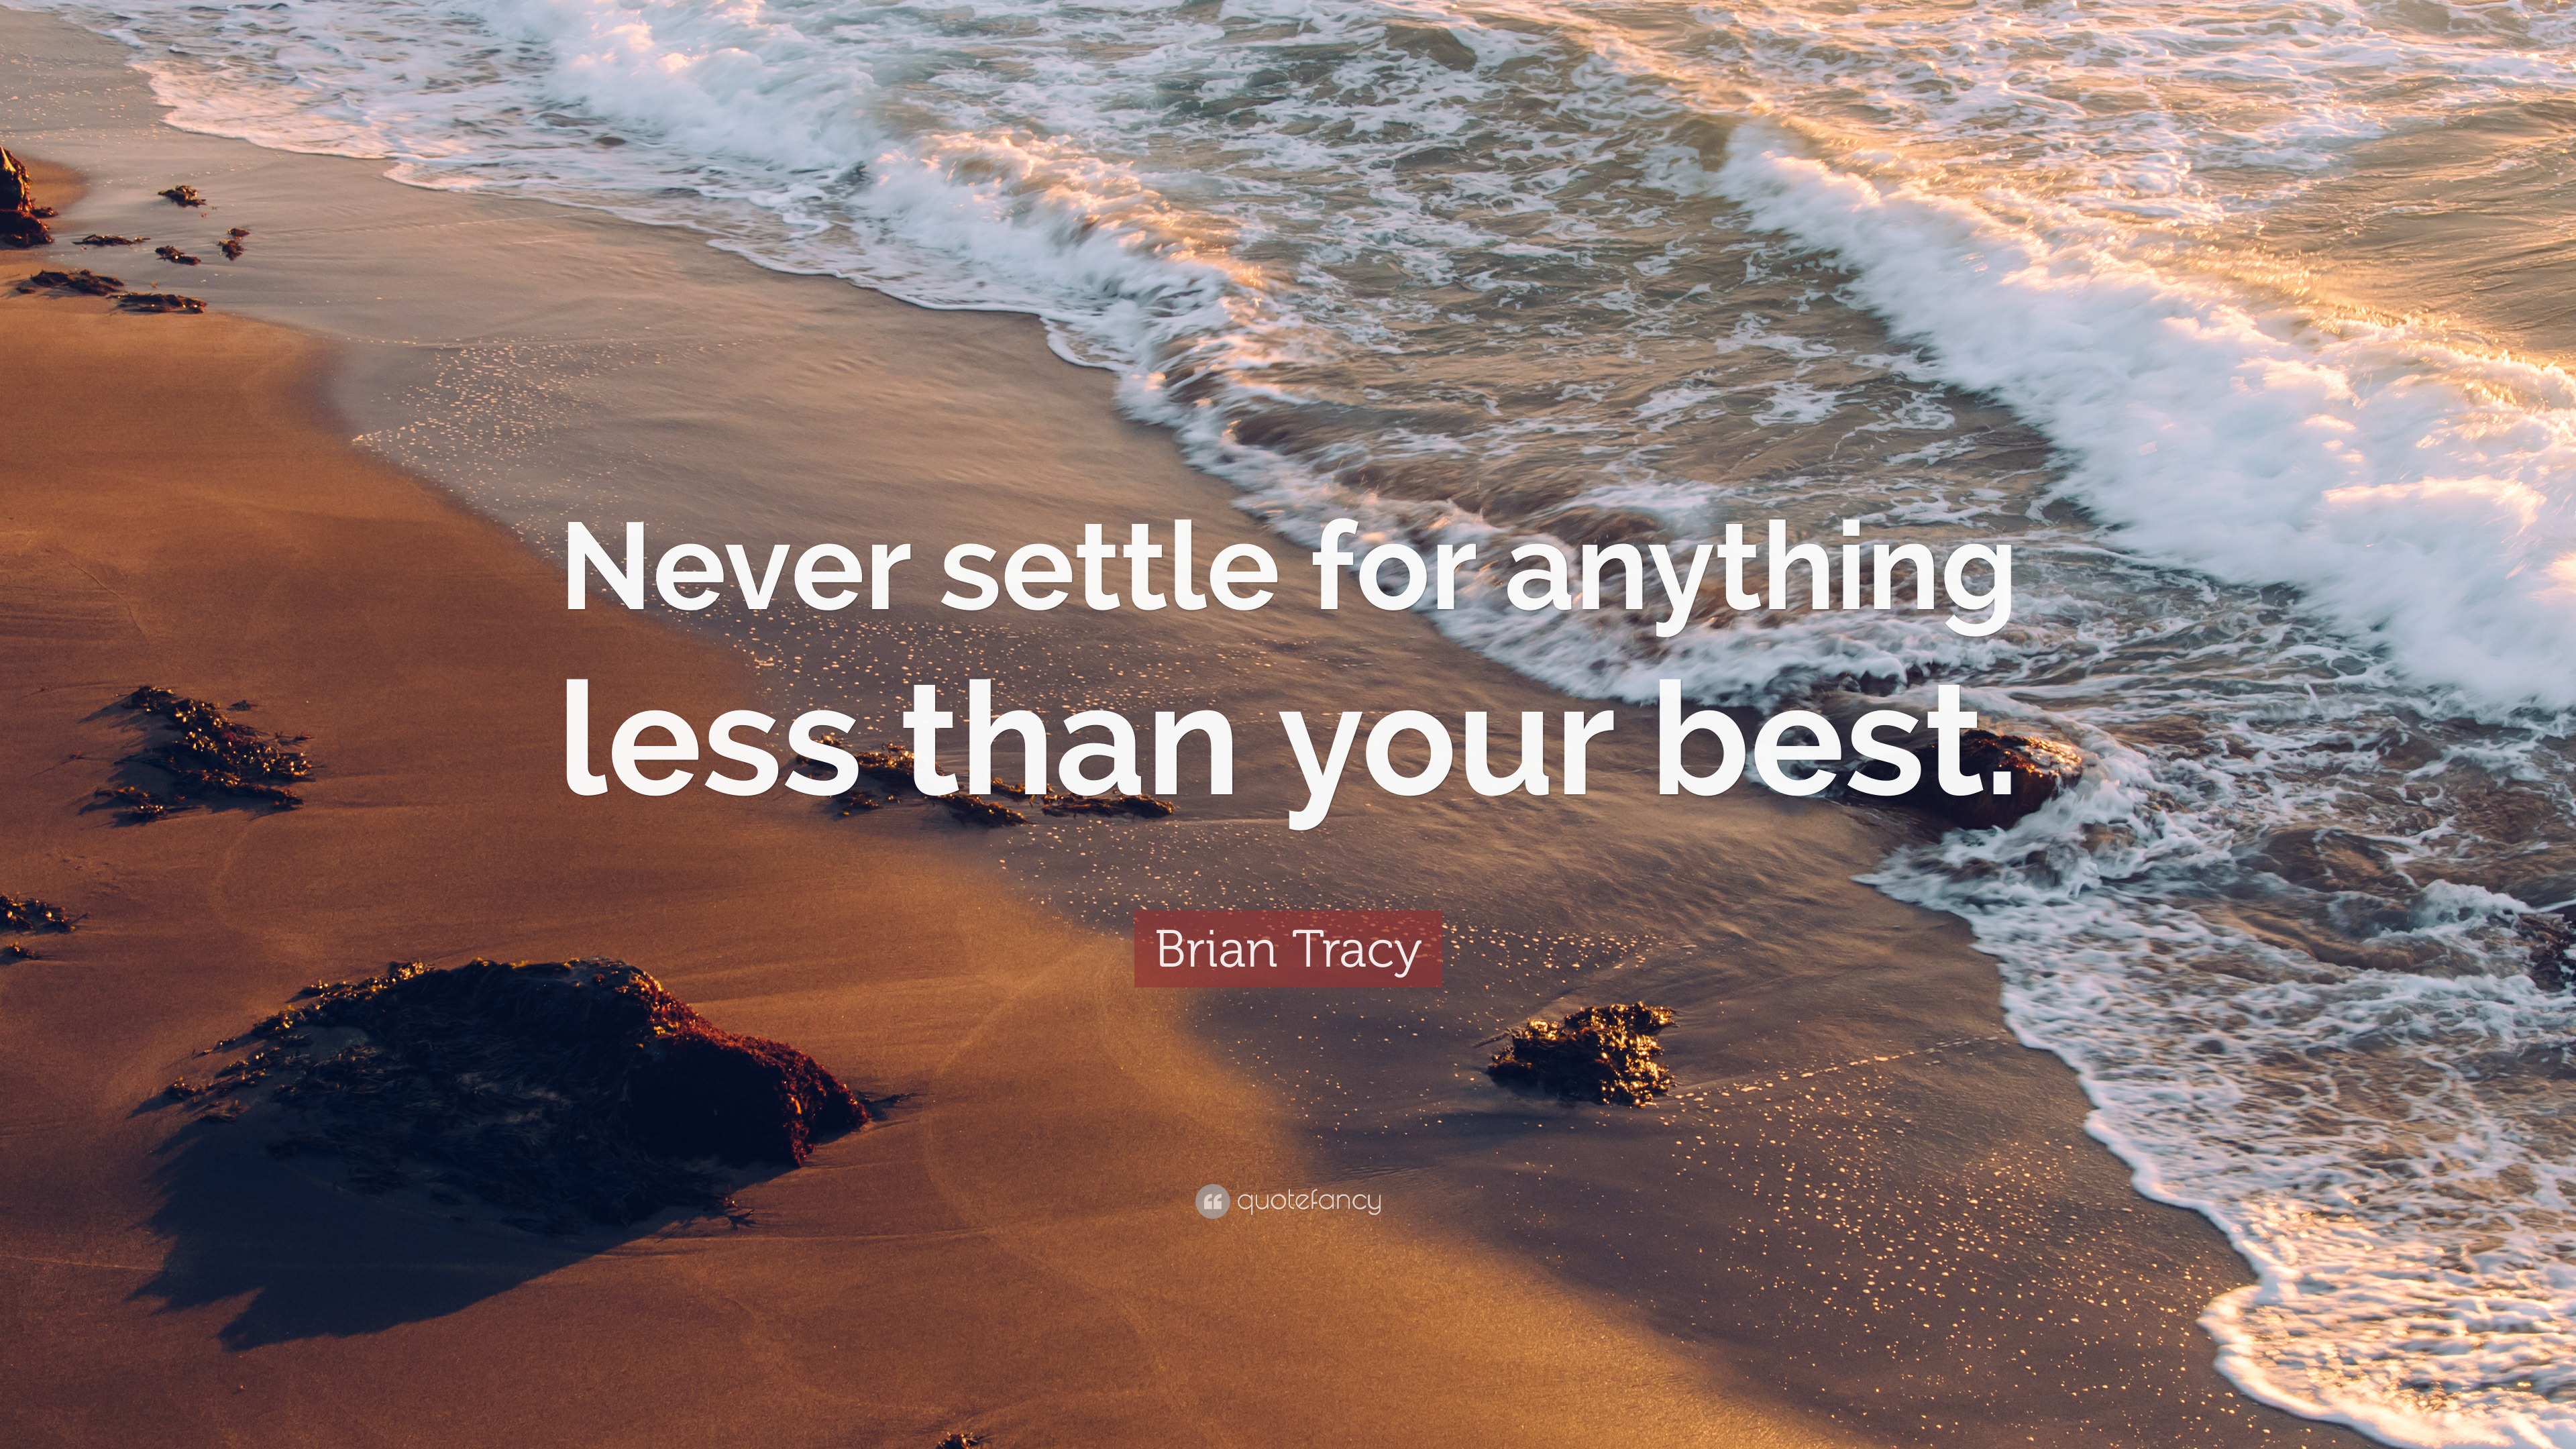 Brian Tracy Quote: “Never settle for anything less than your best.” (12